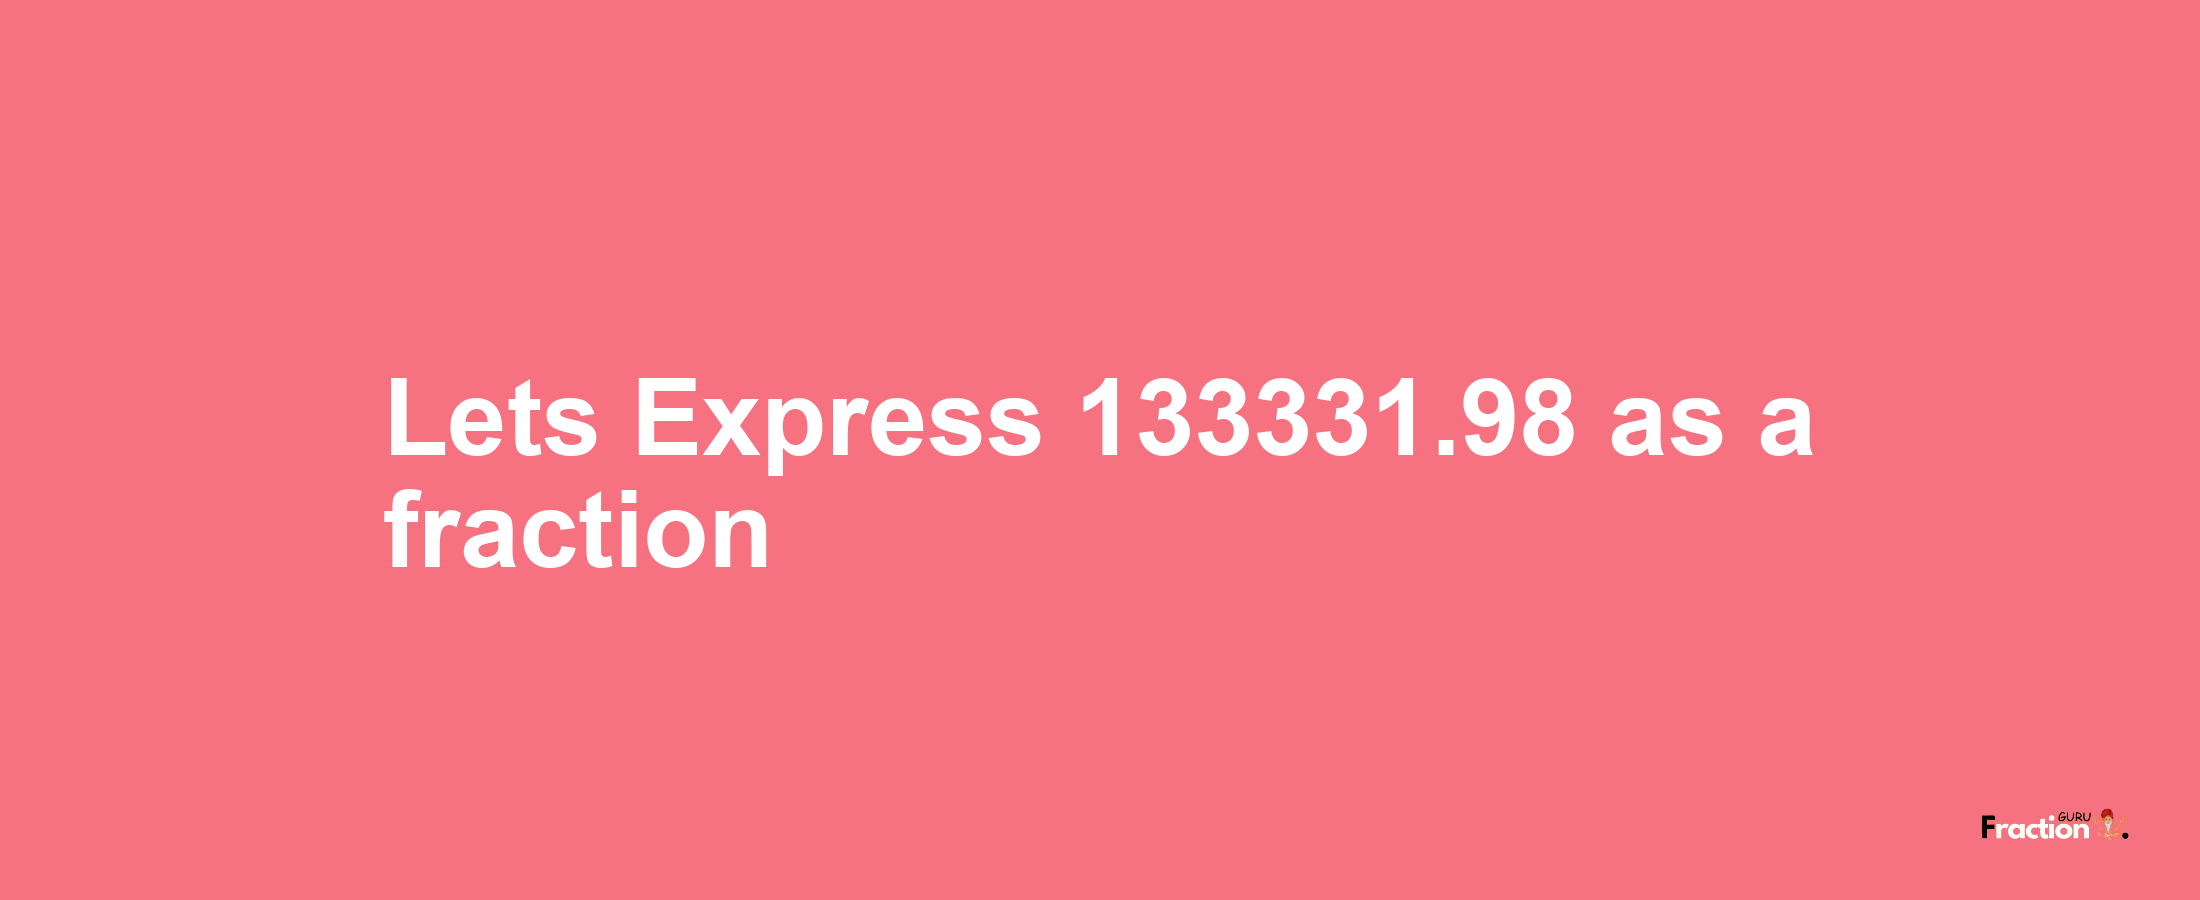 Lets Express 133331.98 as afraction